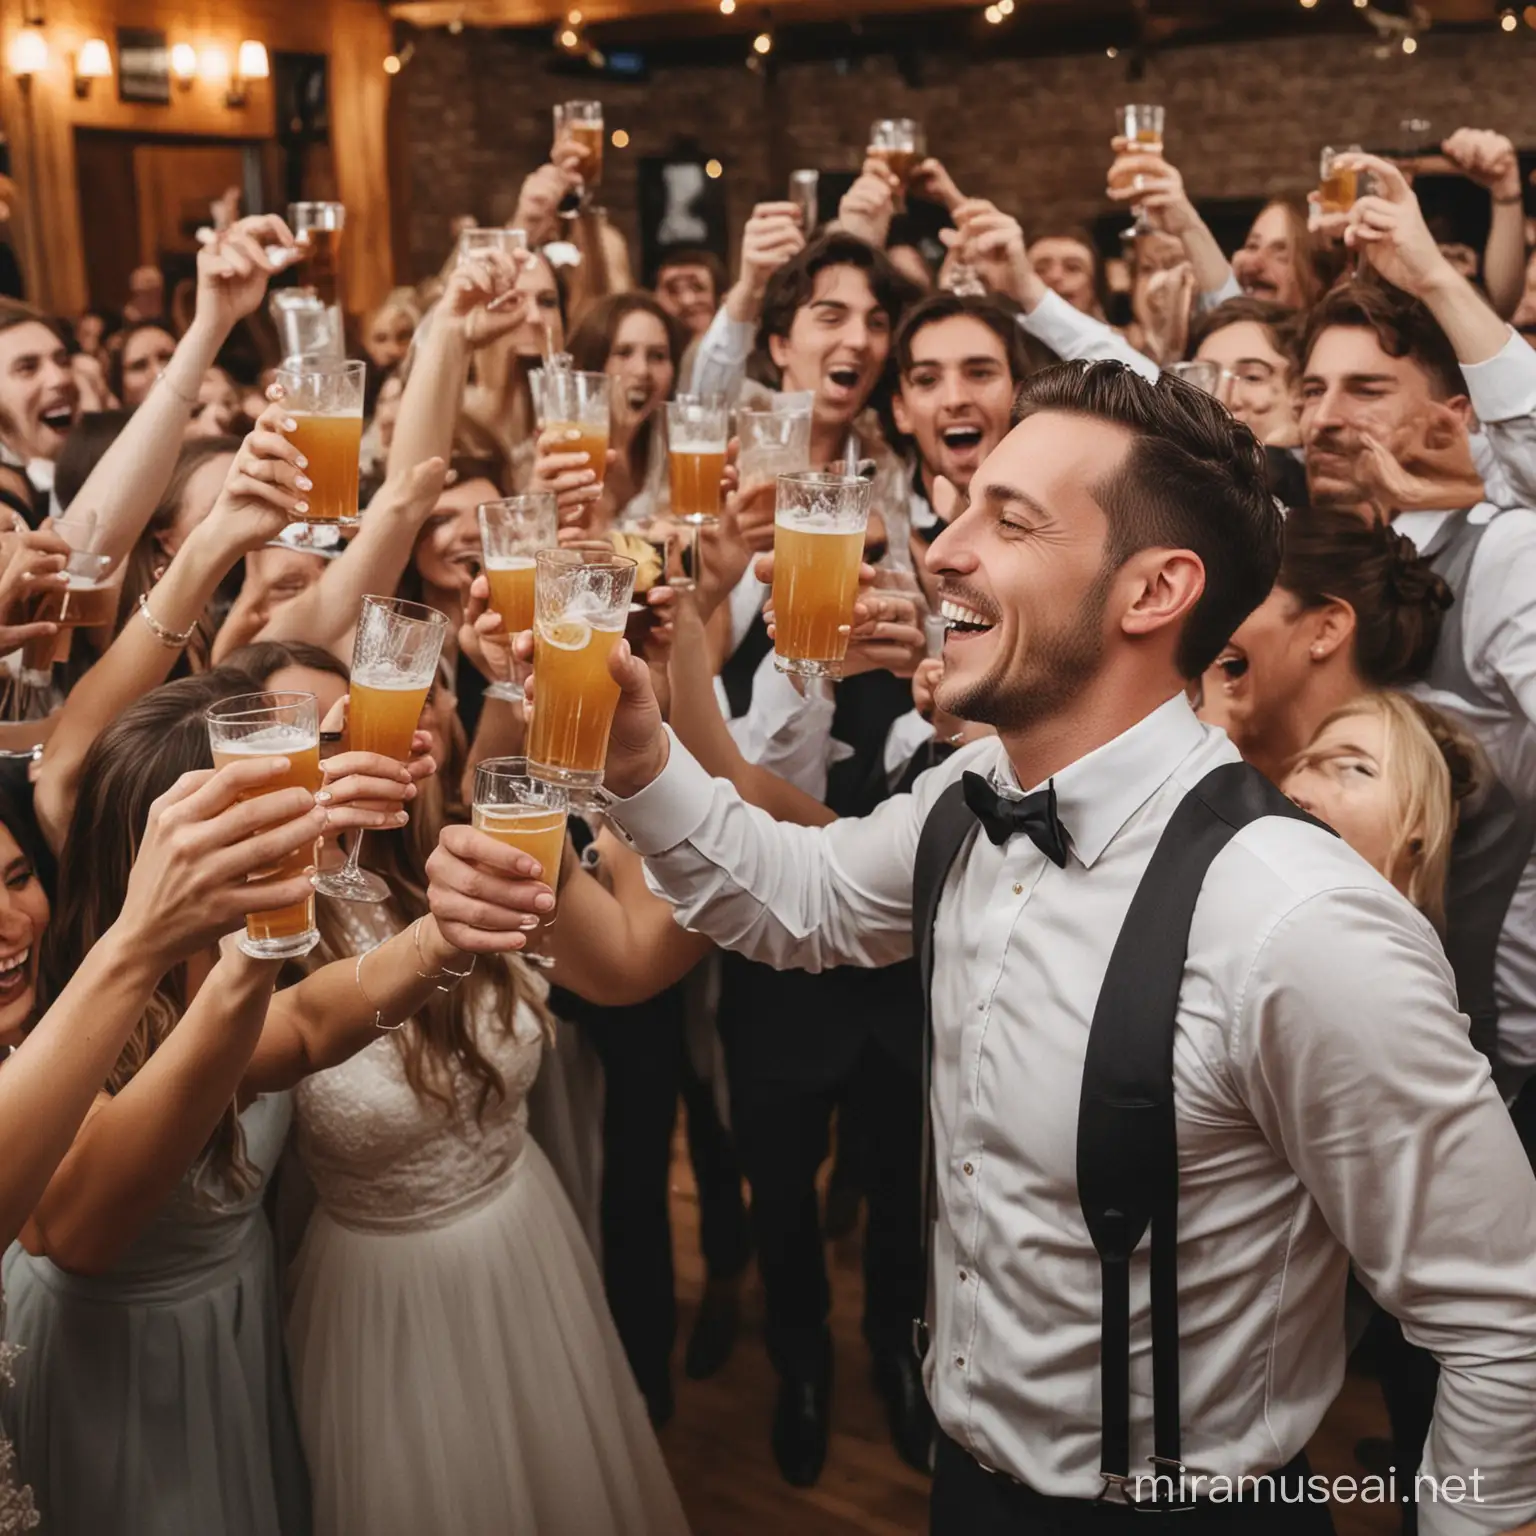 A picture of a crowd having a wonderful time at a wedding reception with drinks in their hand from the point of view of the bartender